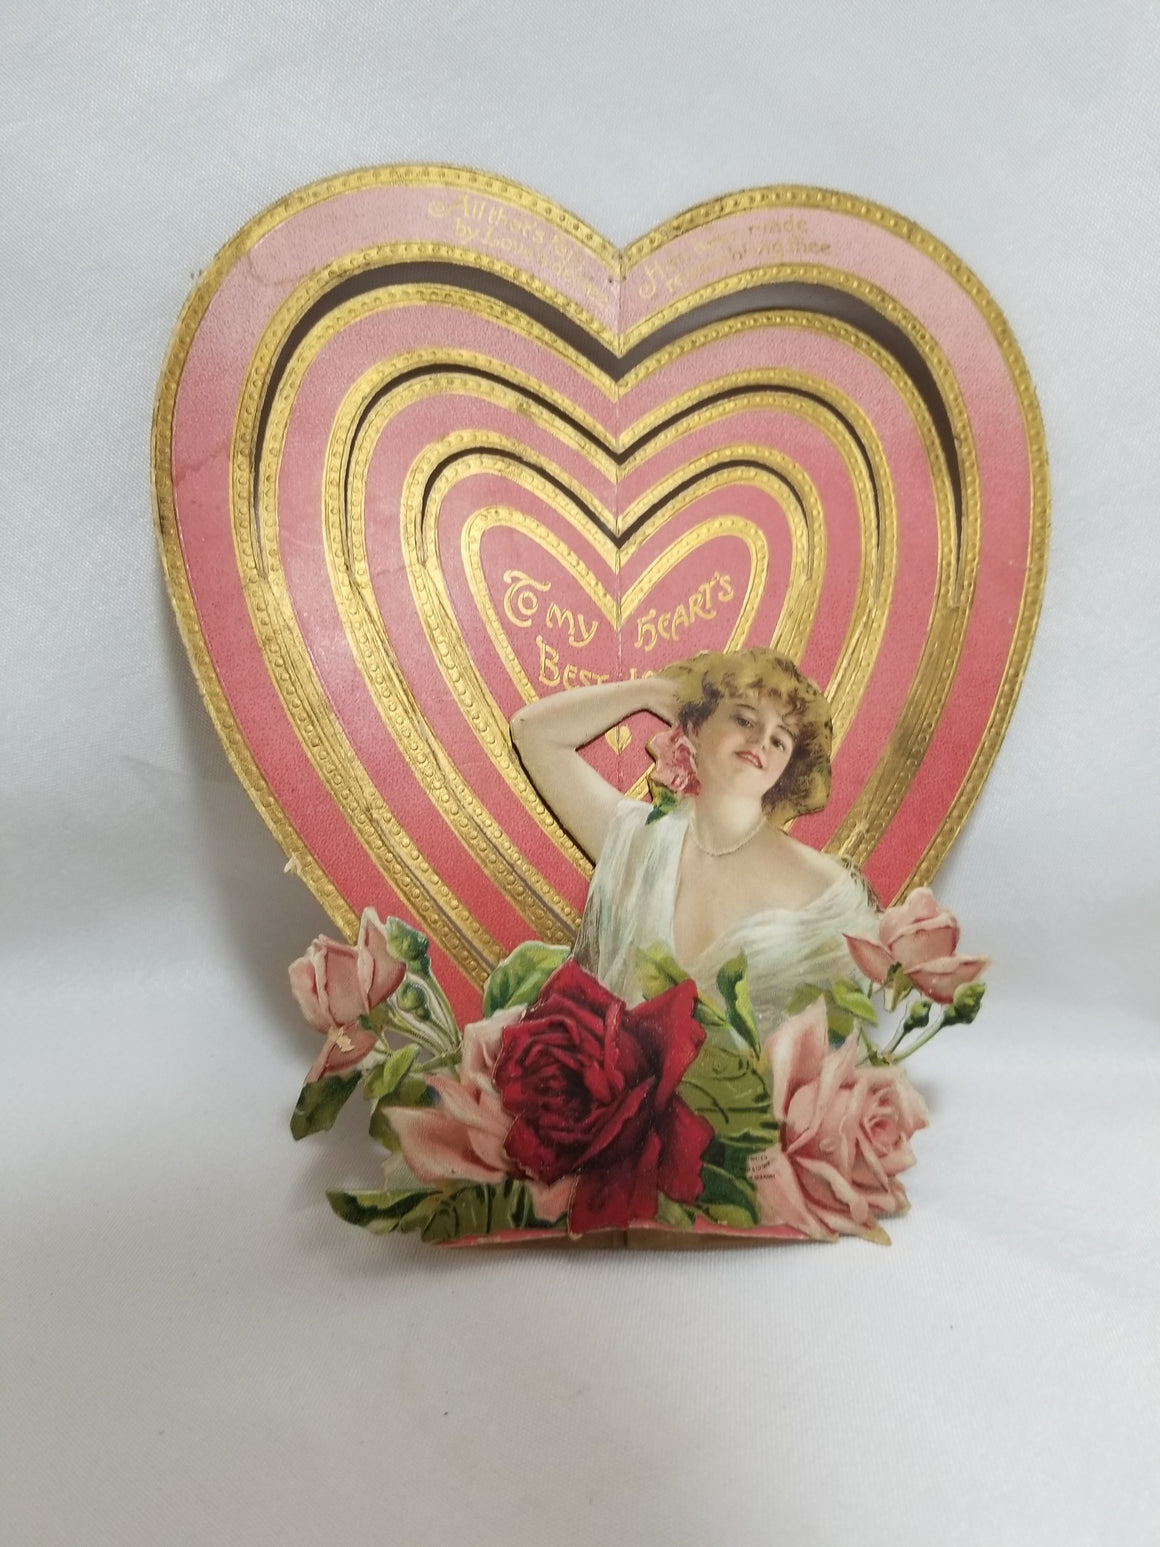 Antique Vintage Die Cut 3D Valentine Card Heart with Woman and Rose Flowers Gold Writing